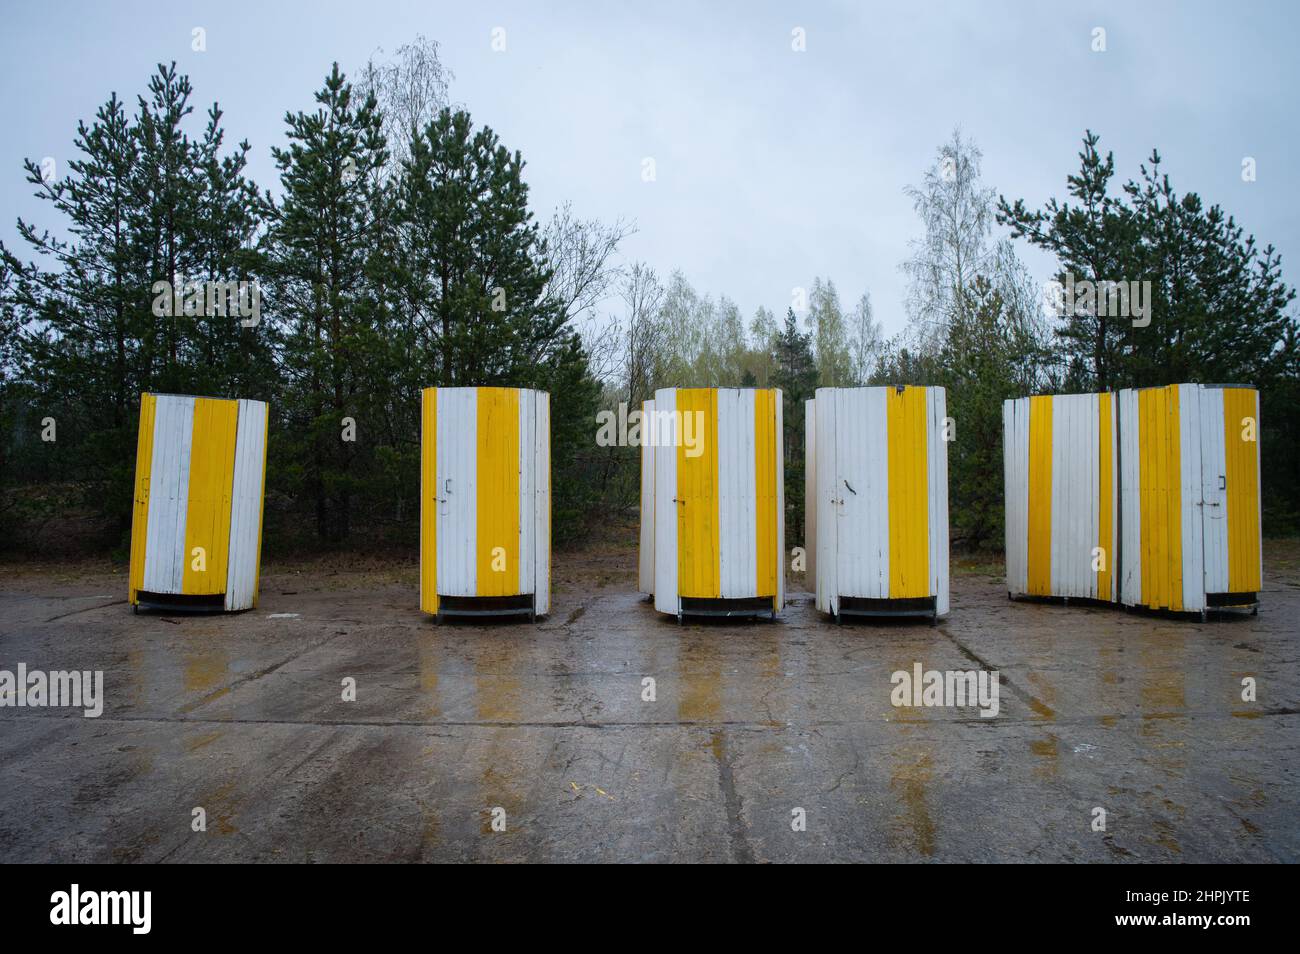 Strand toilets. Yellow movable strand toilets in a row. Mockup friendly Stock Photo